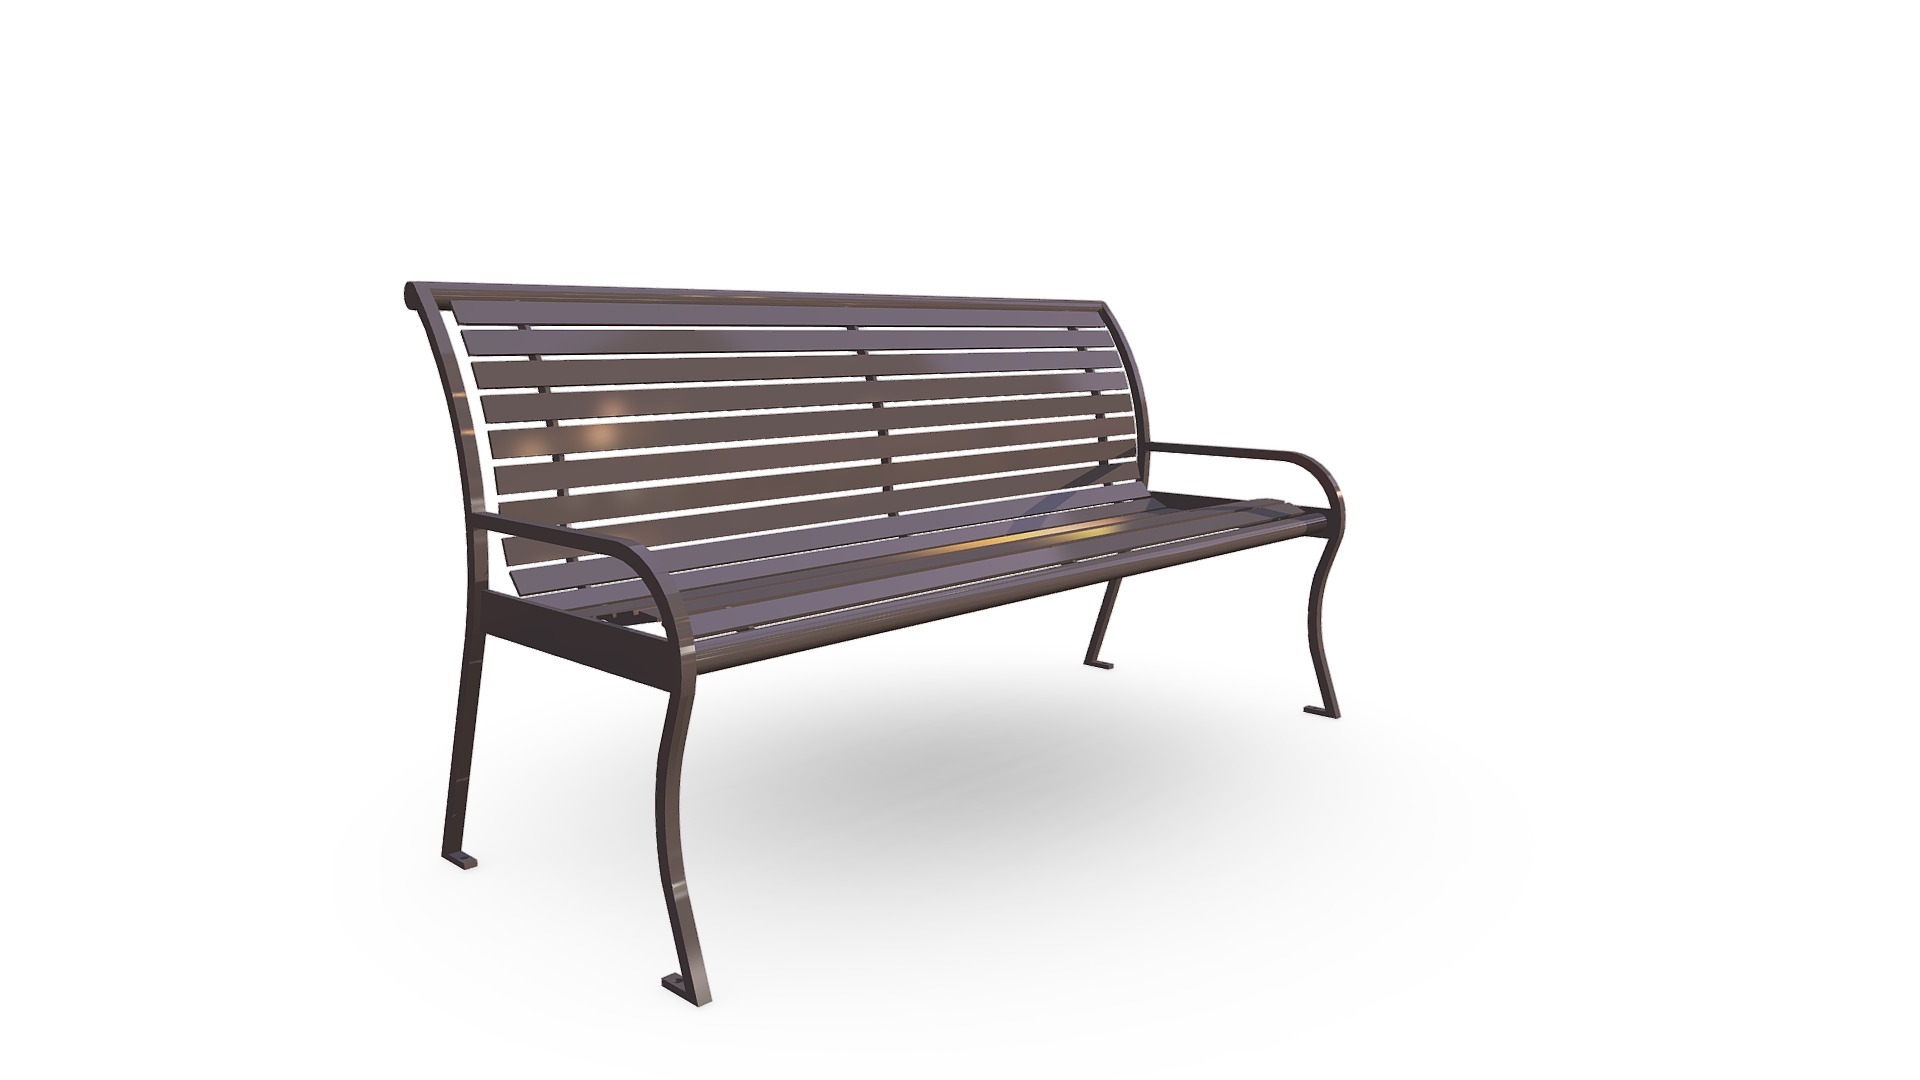 3D model SC-03.1,5 - This is a 3D model of the SC-03.1,5. The 3D model is about a bench with a seat.